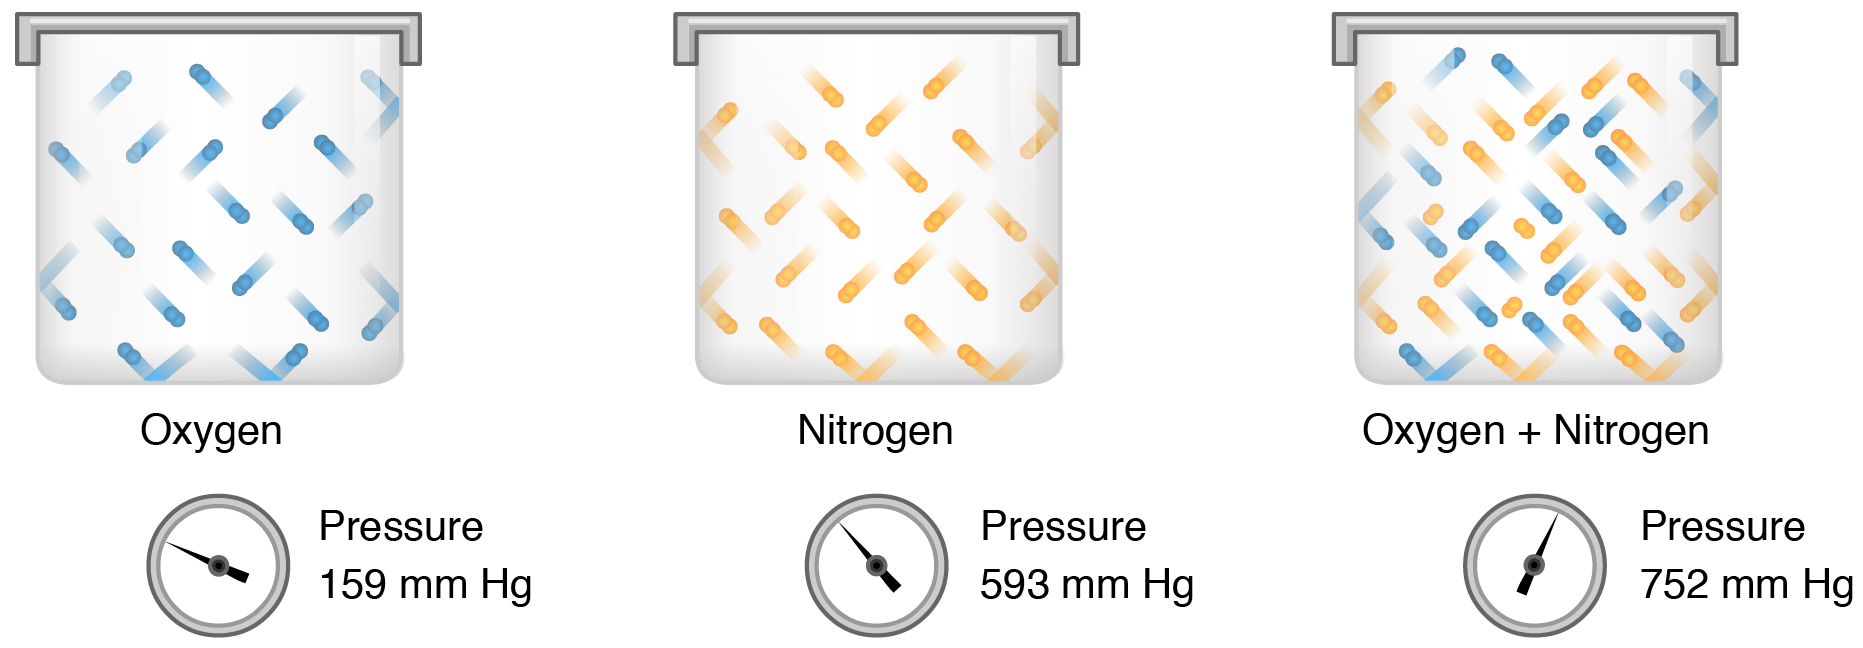 The left panel of this figure shows a canister of oxygen. The middle panel shows a canister of nitrogen. The right panel shows a canister containing a mixture of oxygen and nitrogen. A pressure gauge on each container shows the pressure exerted by the gas in that container.